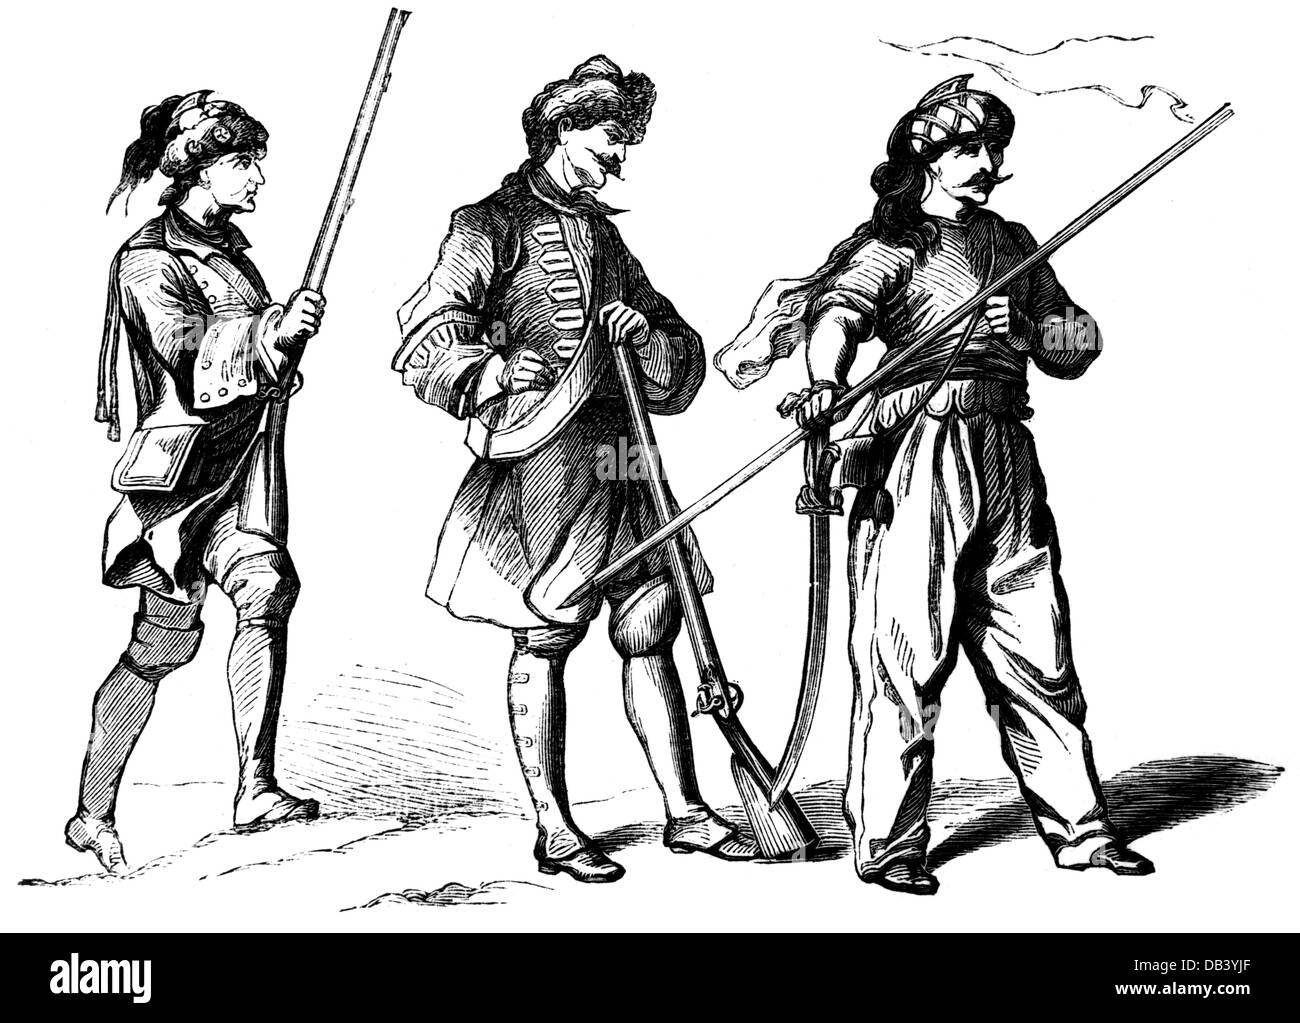 military, France, soldiers, dragoon and lancer of the Volontaires de Saxe, grenadier, circa 1750, wood engraving, circa 1870, soldiers, soldier, infantry, cavalry, weapons, arms, weapon, arm, rifle, gun, rifles, guns, sabre, sabres, lance, lances, uniform, uniforms, army, armies, armed forces, 18th century, historic, historical, people, Additional-Rights-Clearences-Not Available Stock Photo